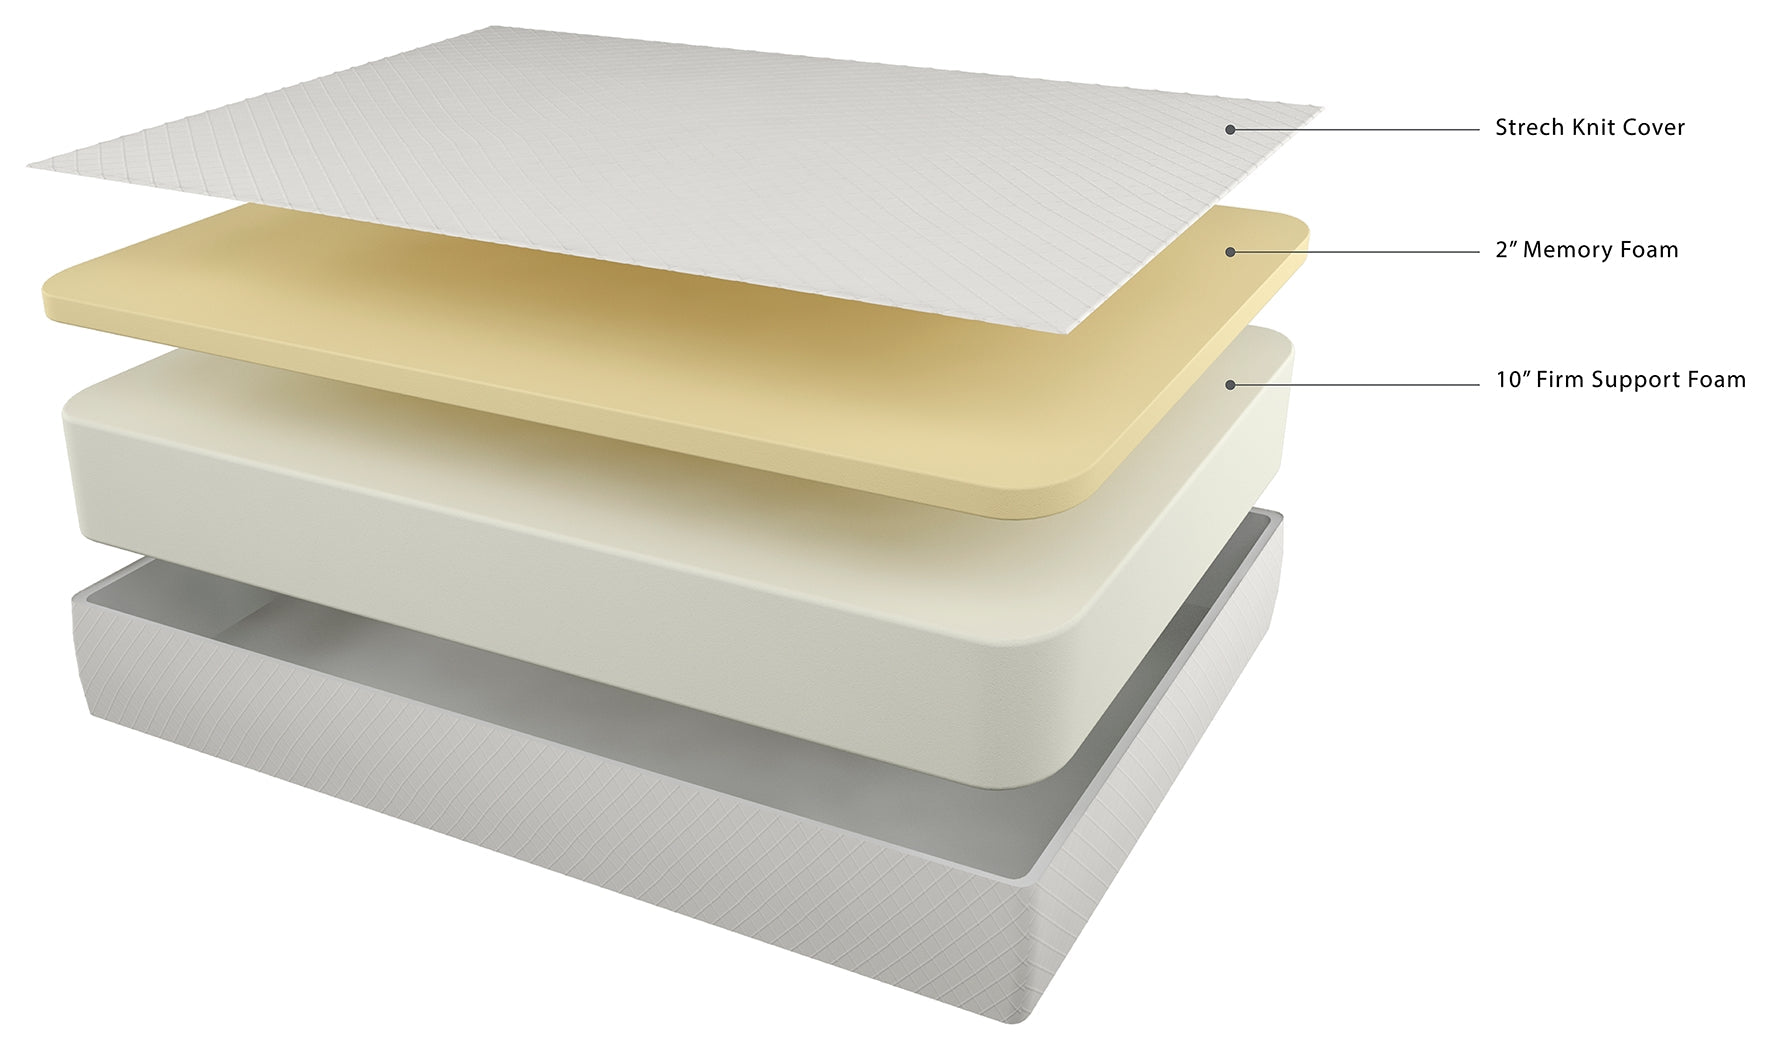 Chime 12 Inch Memory Foam Queen Mattress in a Box with Head-Foot Model-Good Queen Adjustable Base - furniture place usa